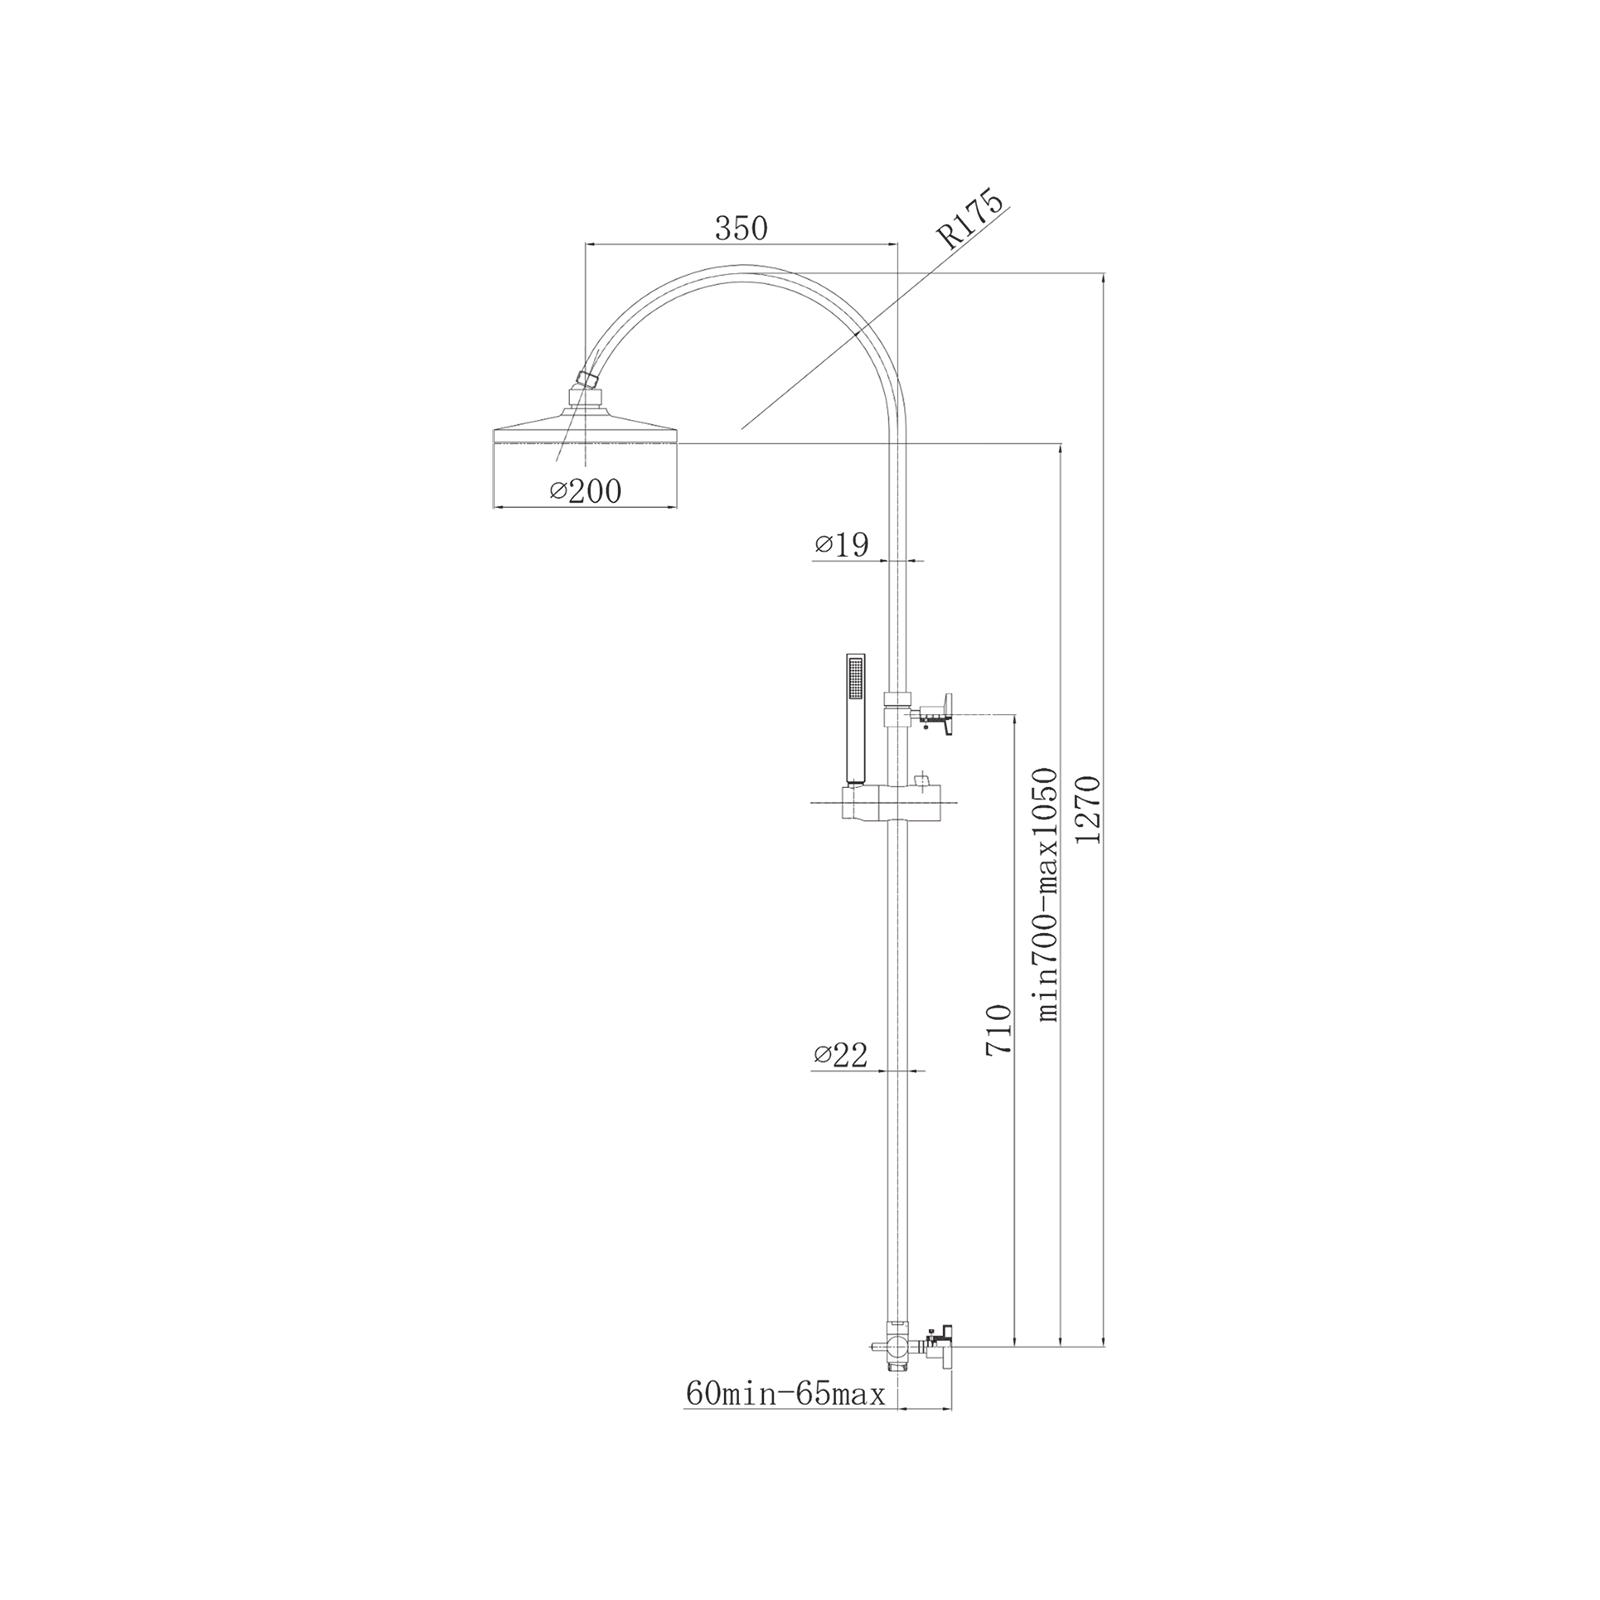 Telescopic shower column with swivel head and head shower